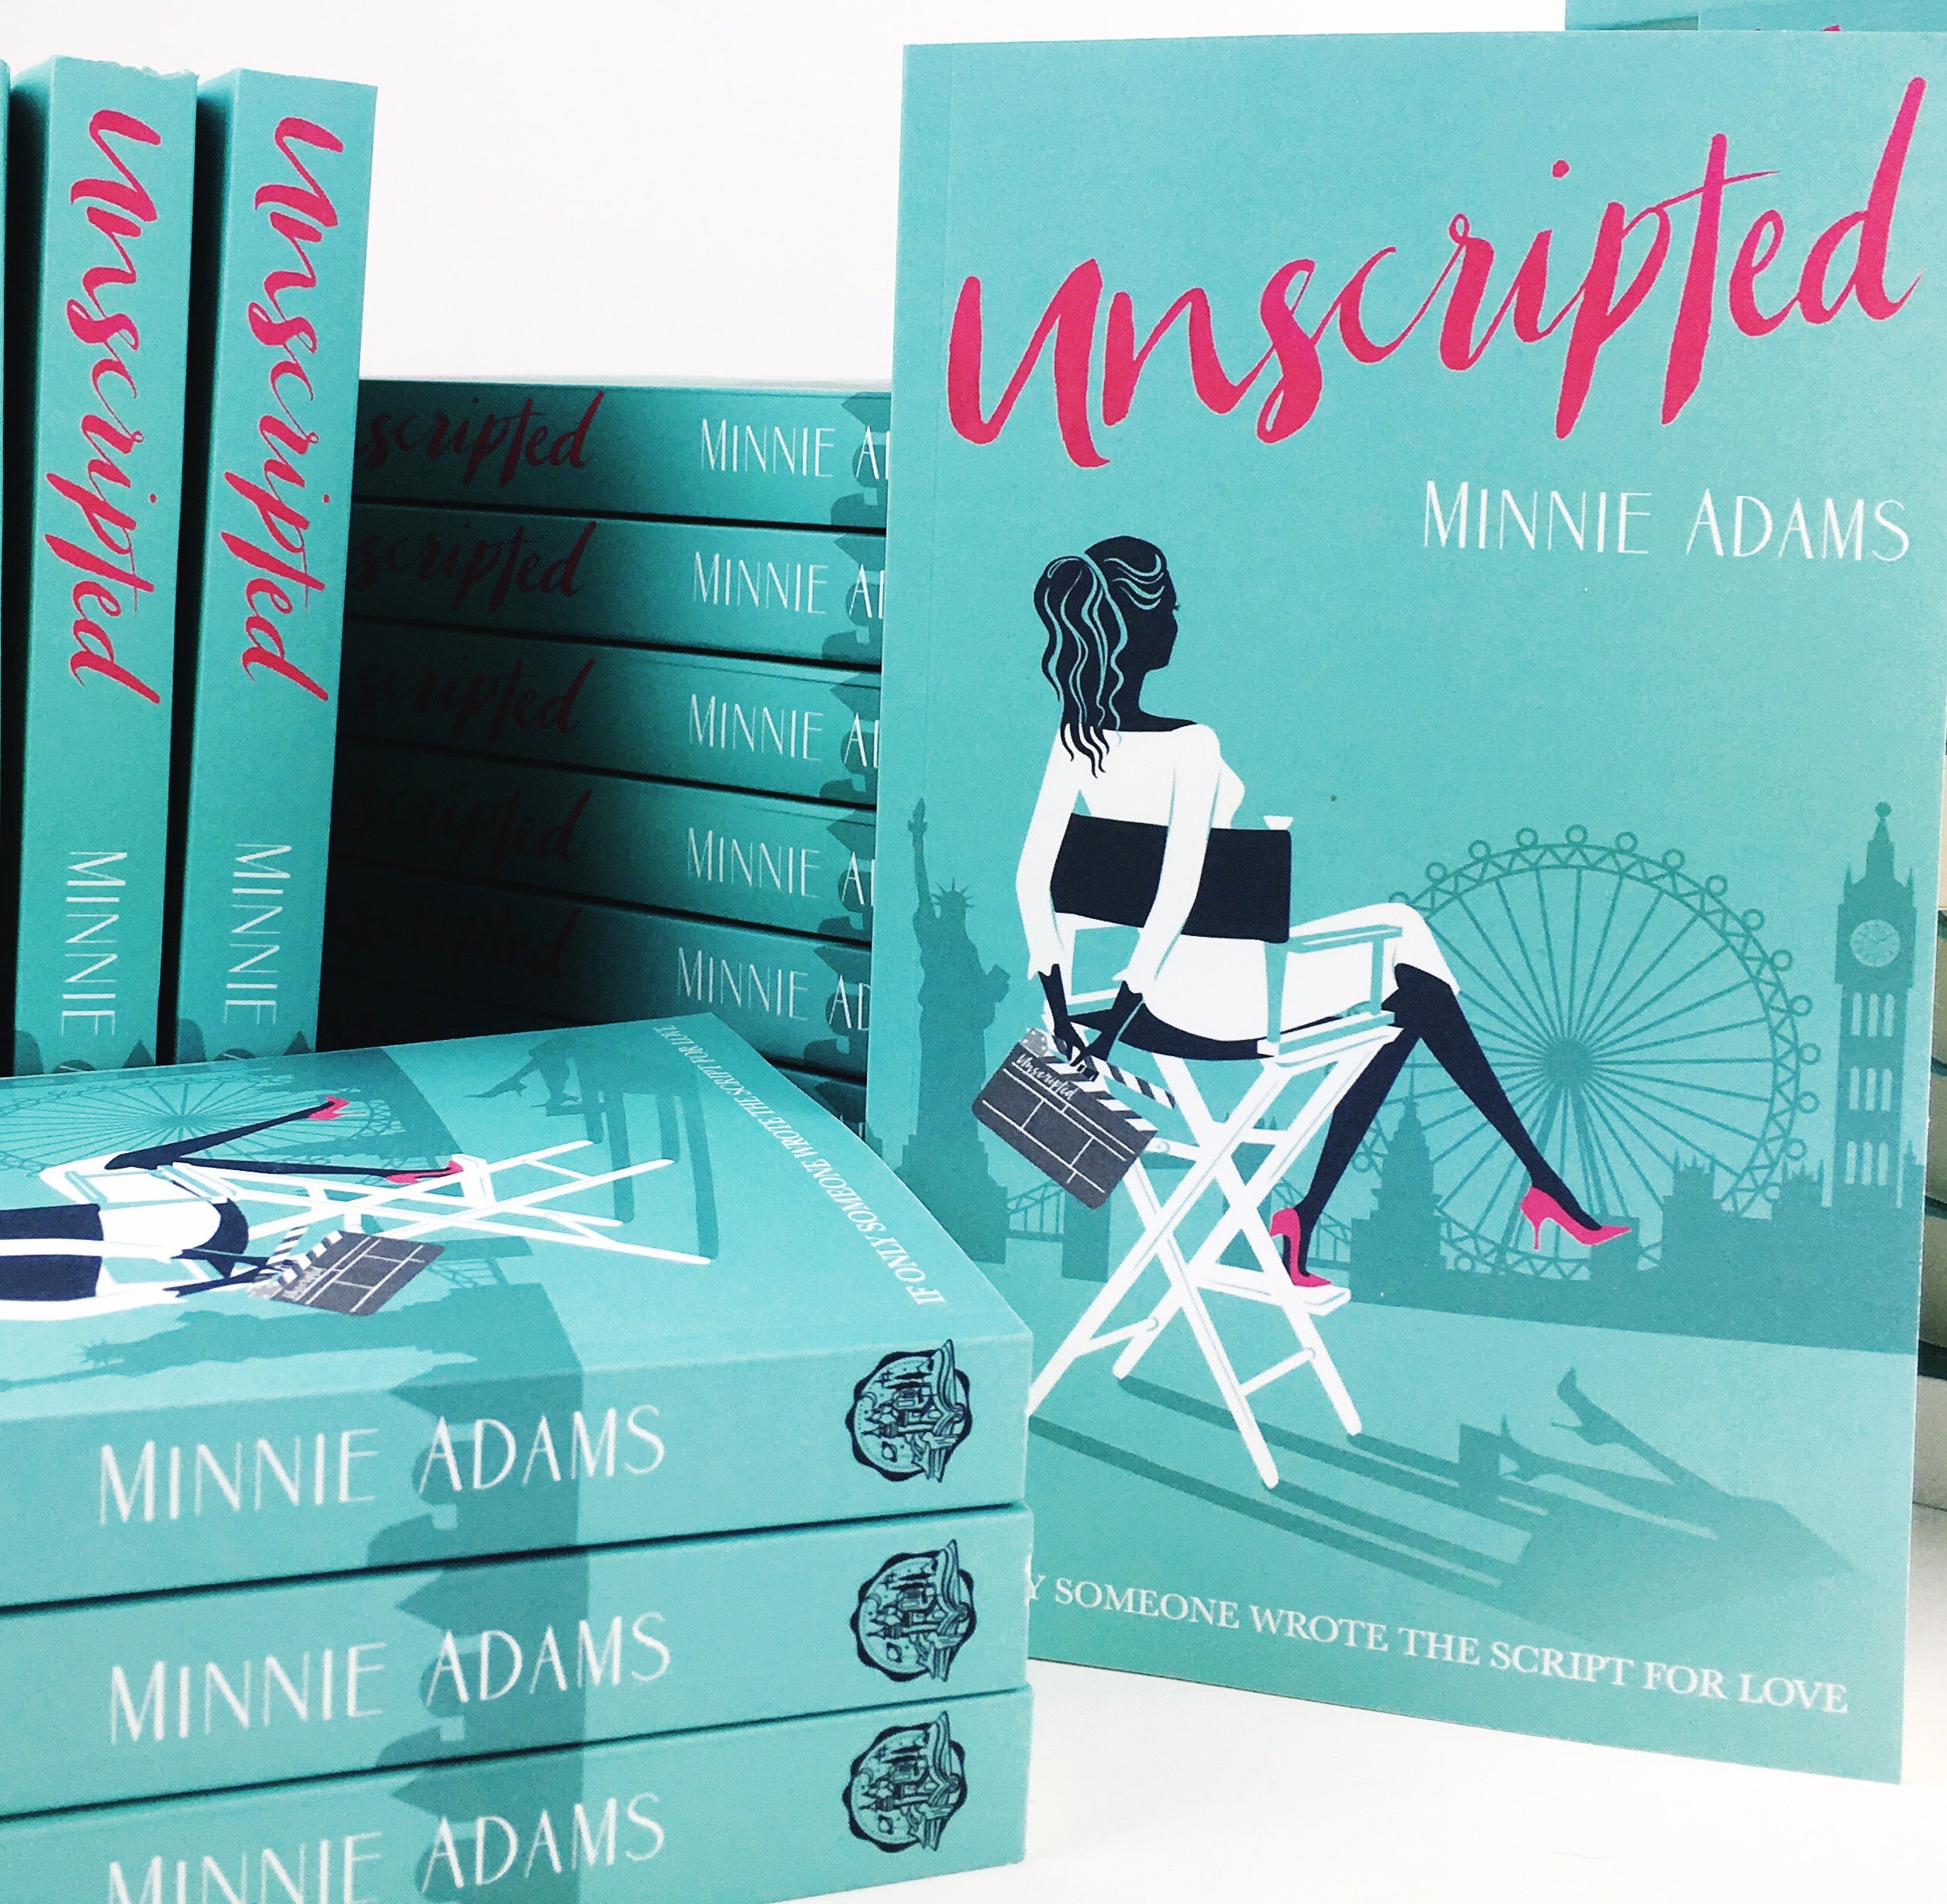 Unscripted - Romantic novel by Minnie Adams